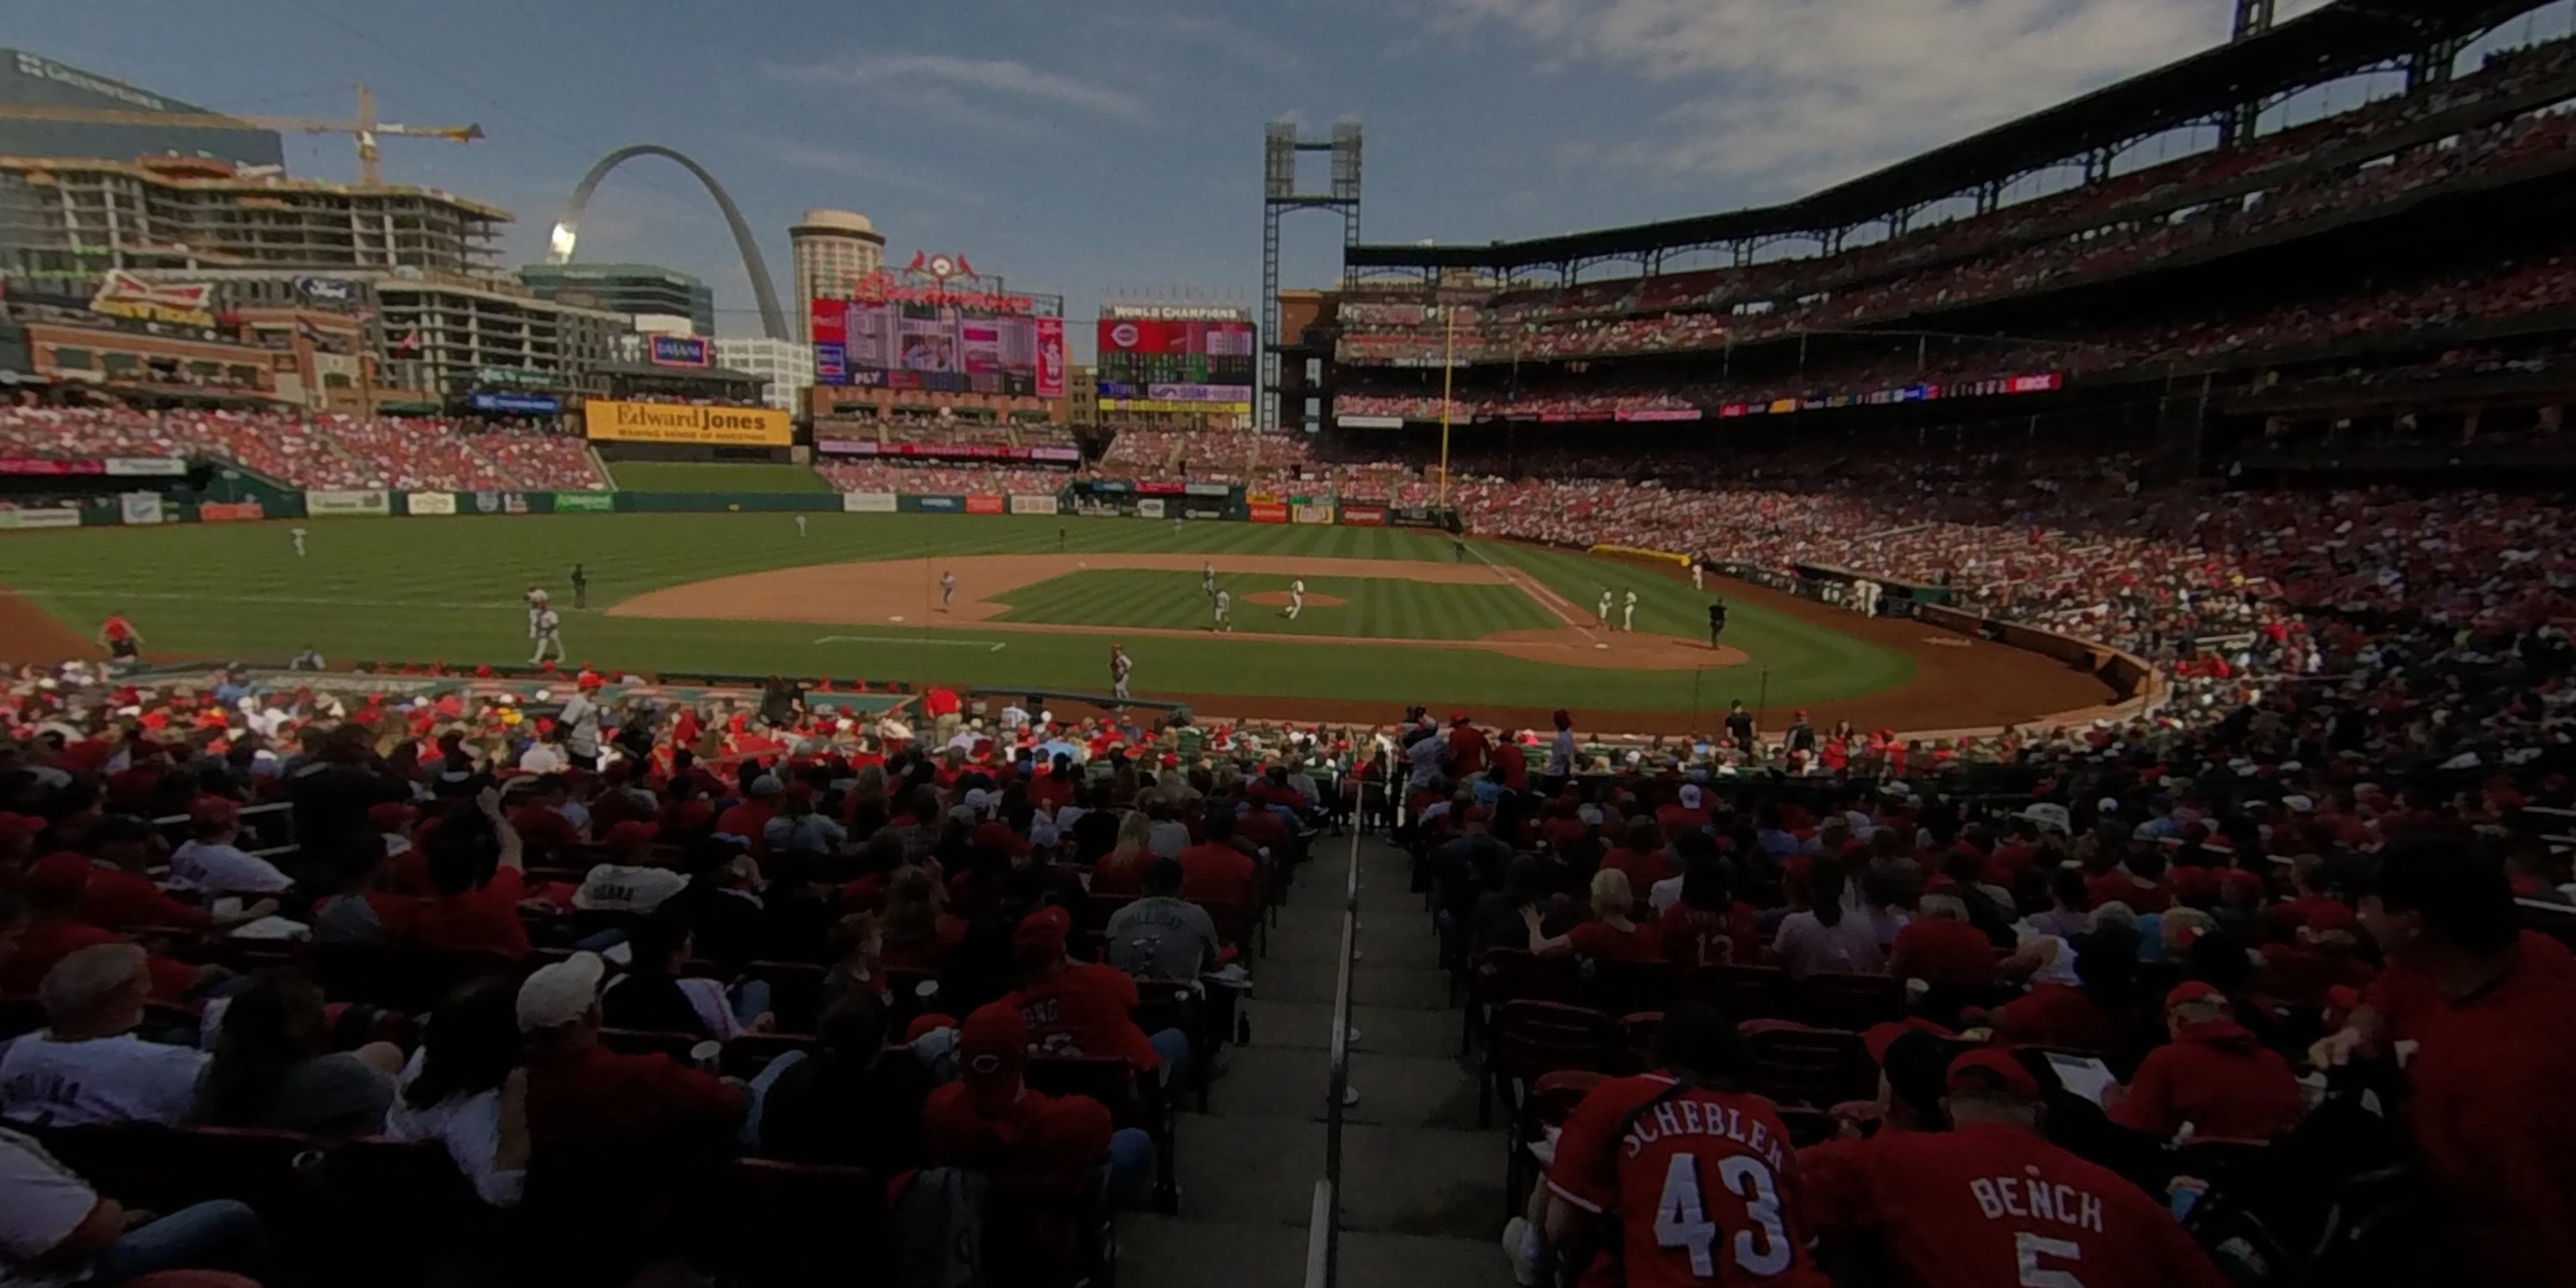 section 154 panoramic seat view  - busch stadium